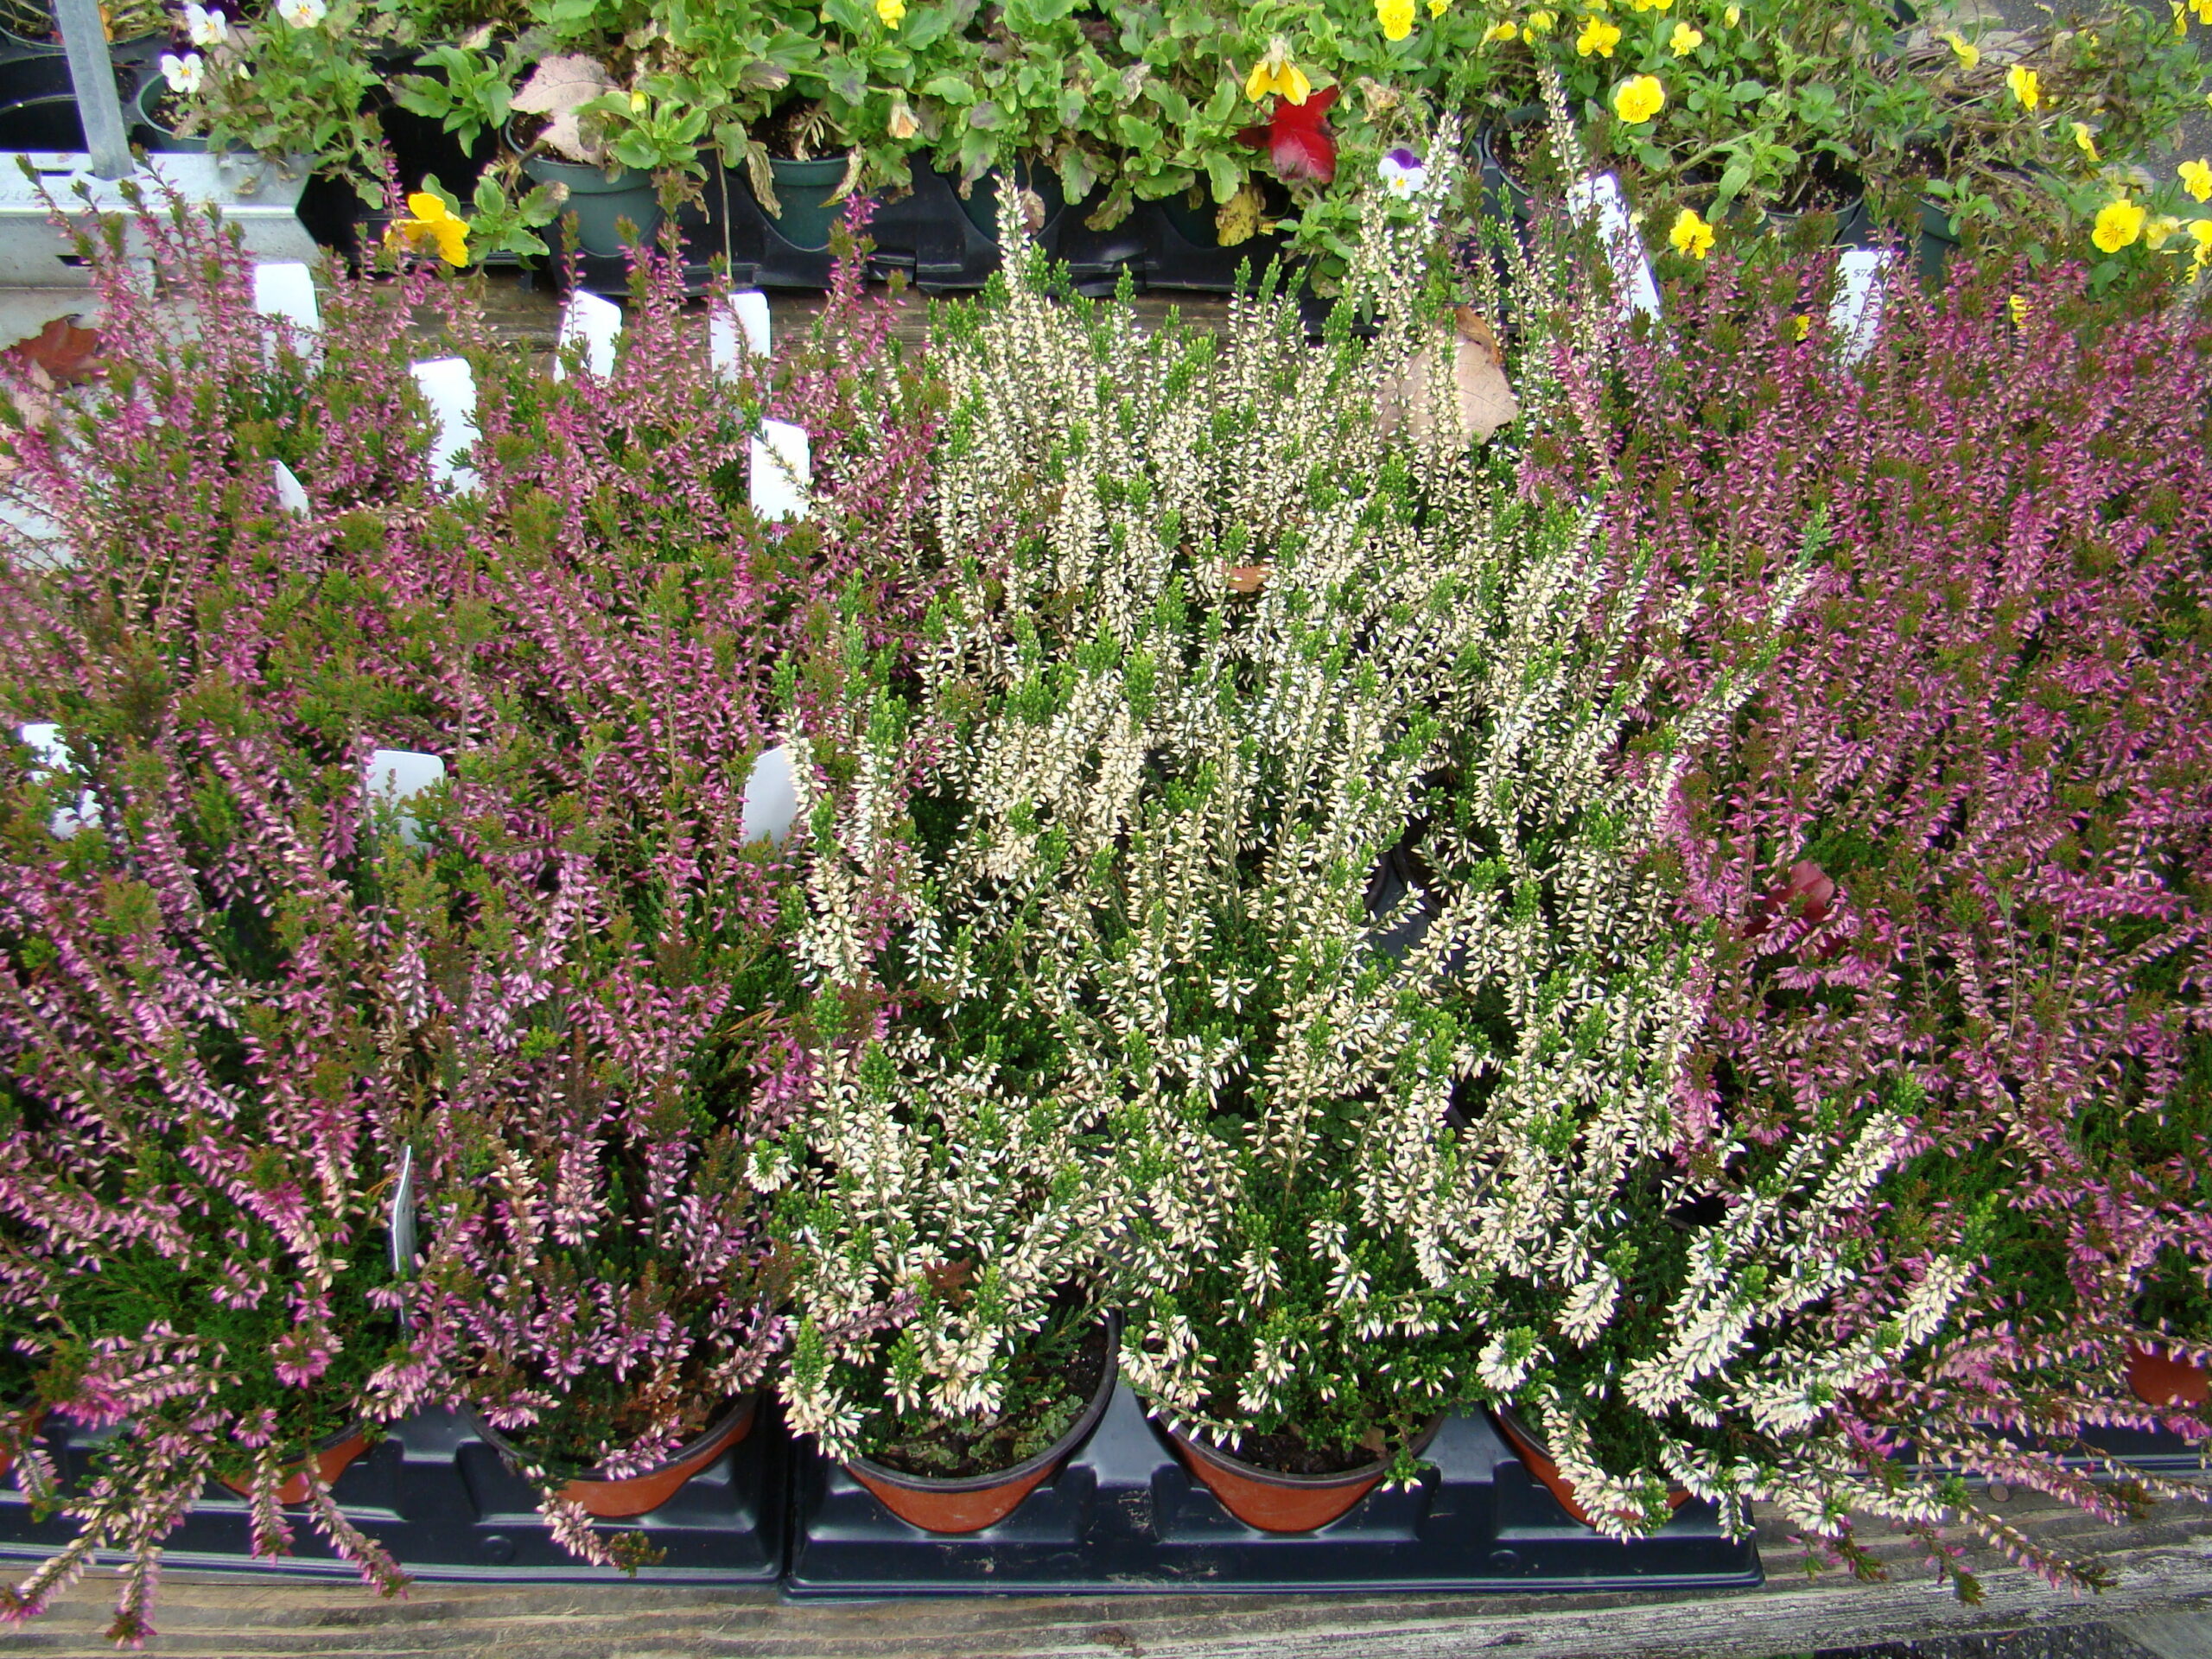 These small quart pots of heathers were seen at a local garden center in mid-October.  You may find them in the spring or in the fall. Both are excellent times for planting.
ANDREW MESSINGER